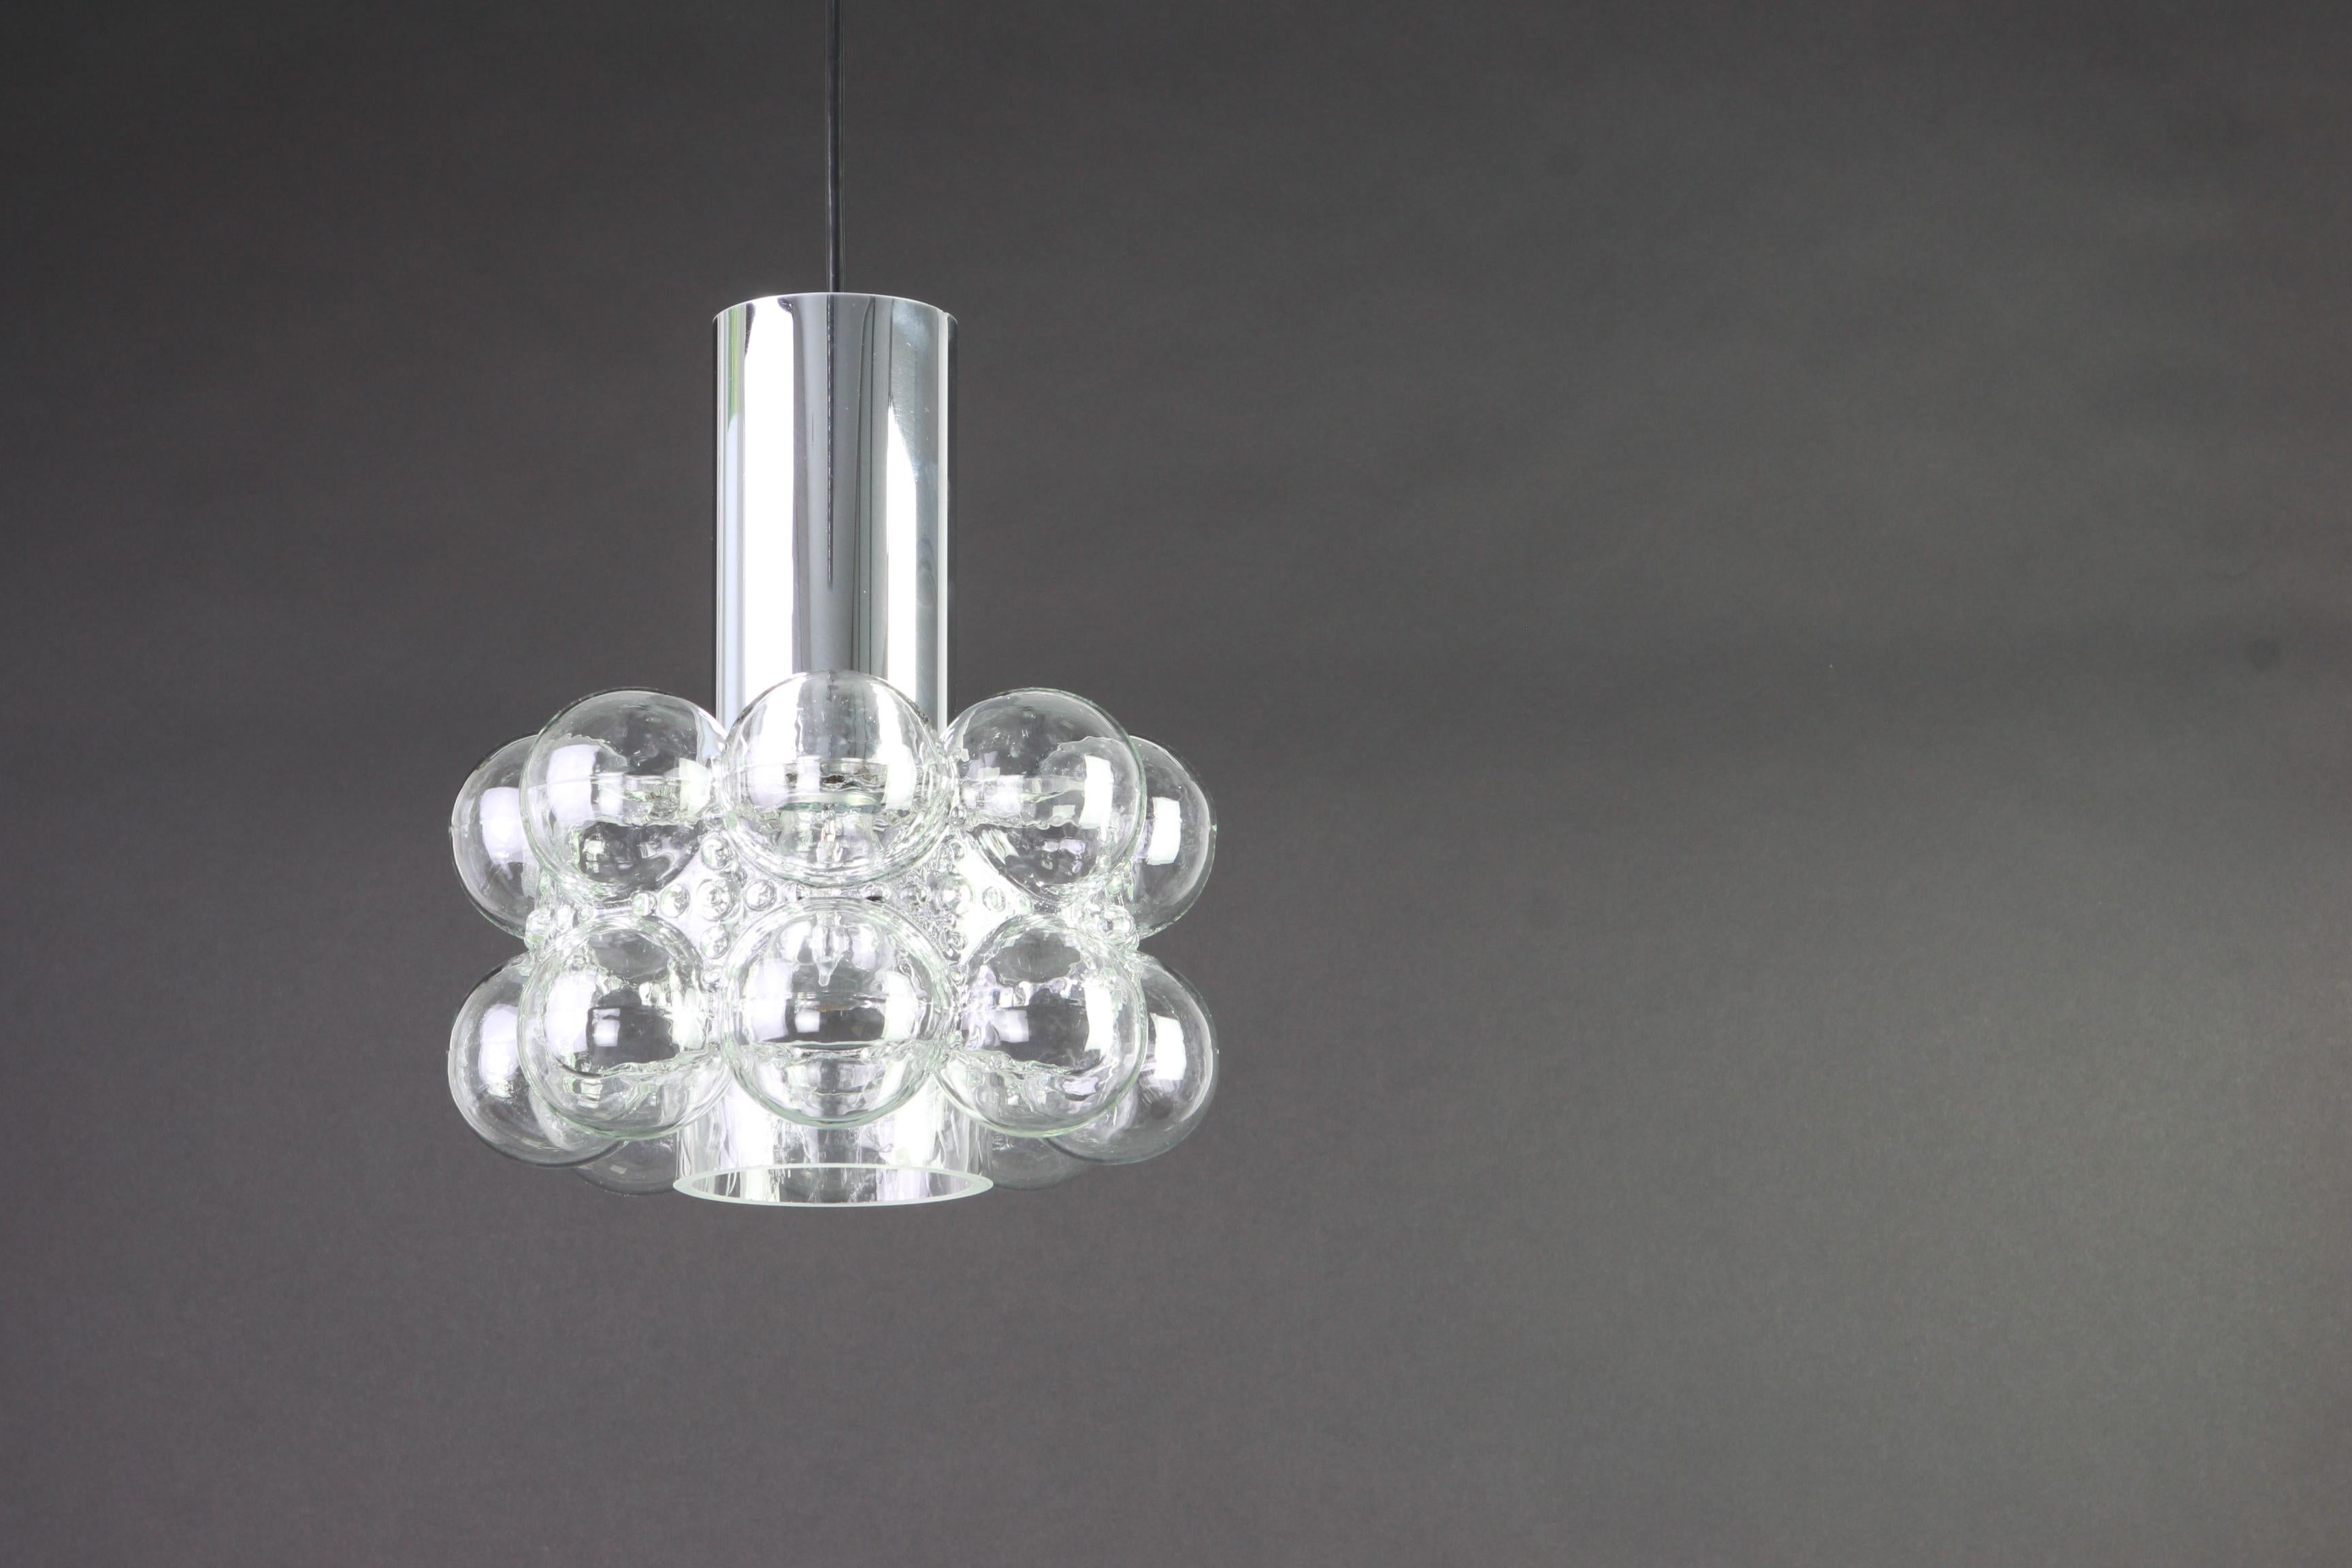 1 of 2 round bubble glass pendant designed by Helena Tynell for Limburg, manufactured in Germany, circa 1970s.

Sockets: needs 1 x E27 standard bulb with 100W max each and compatible with the US/UK/ etc standards
Drop rod can be adjusted as